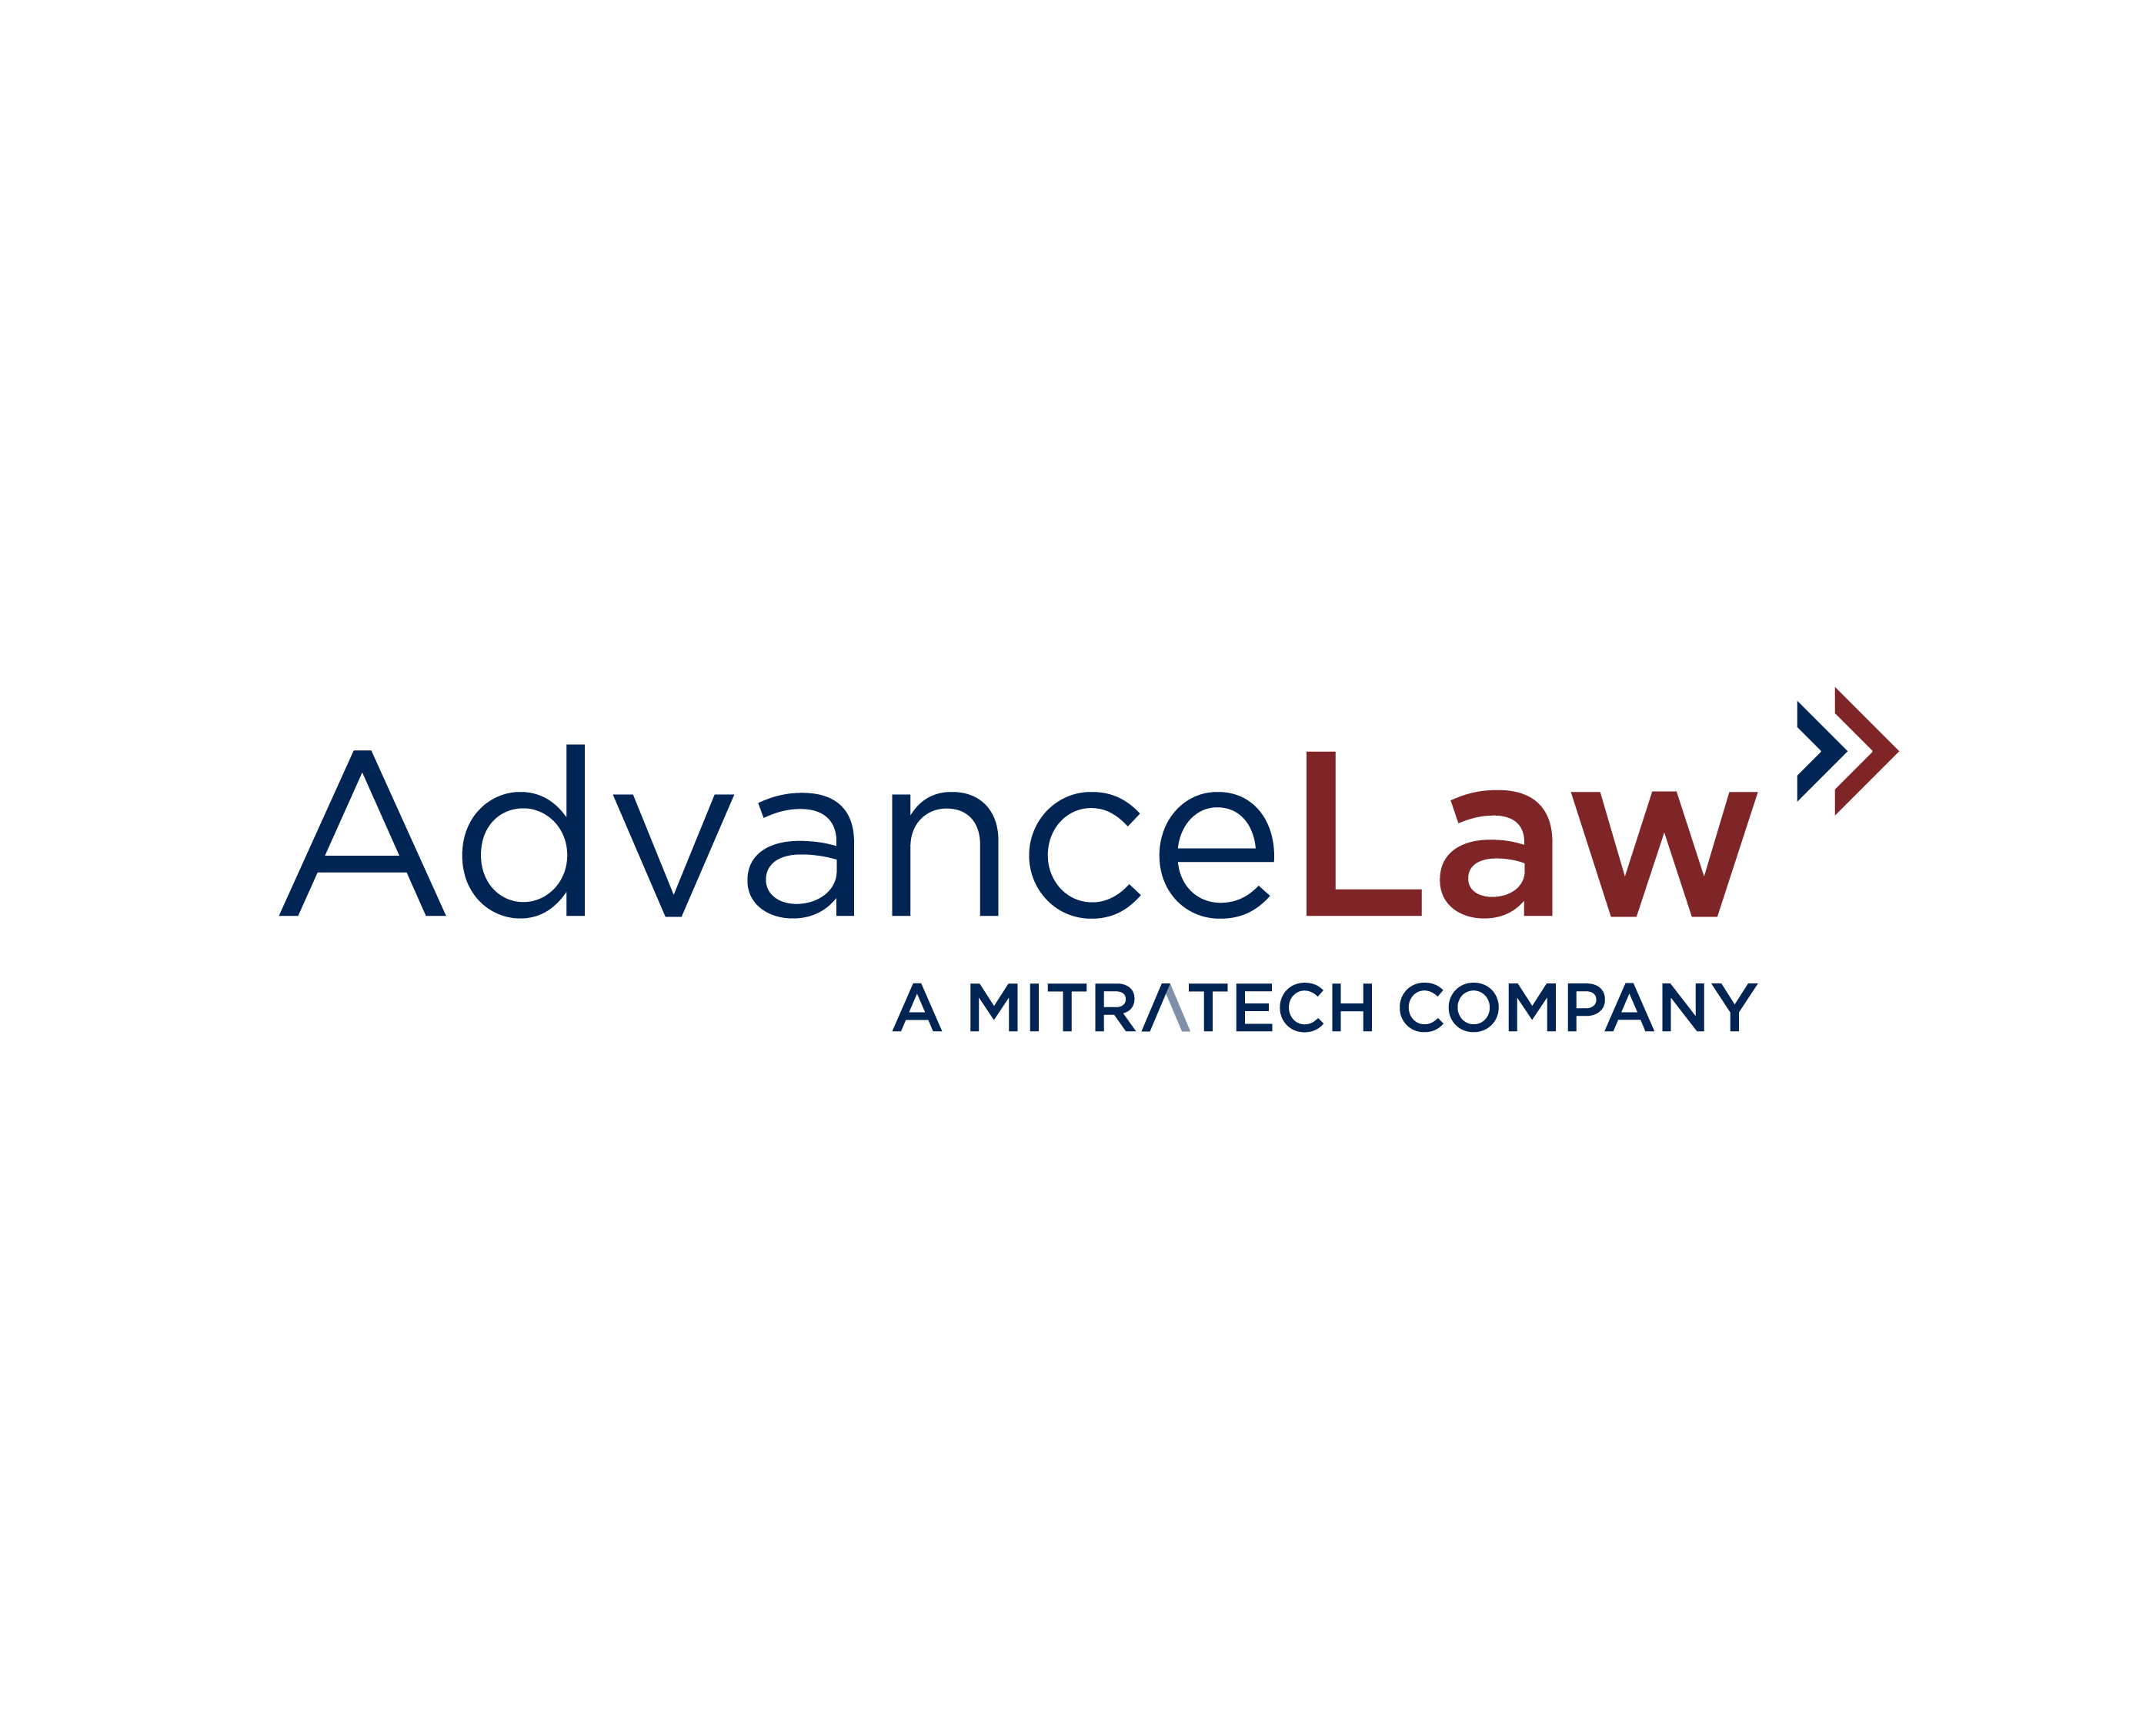 Interact Experience - AdvanceLaw